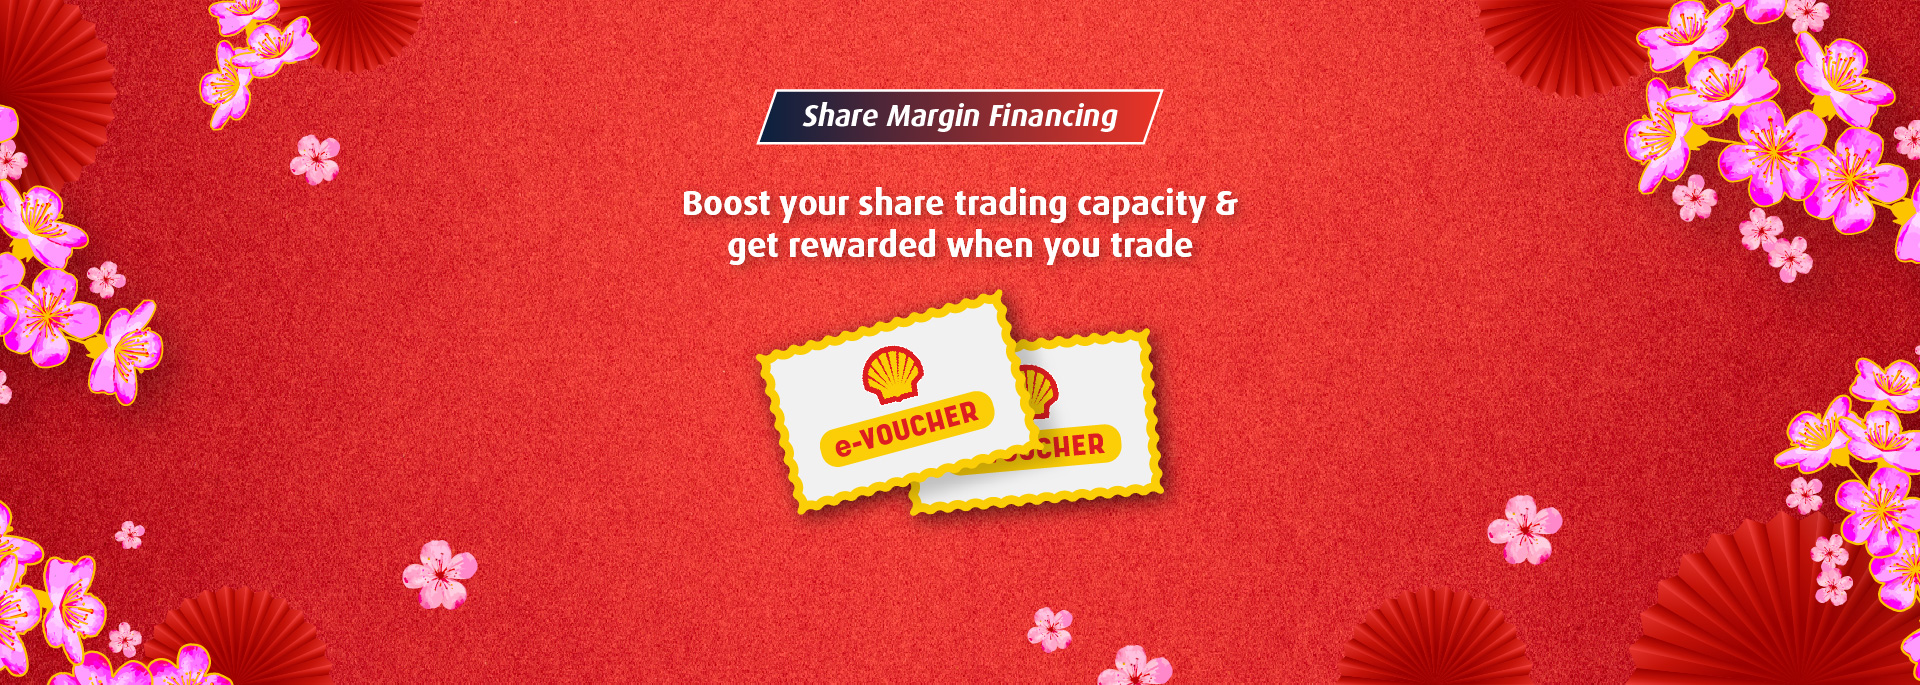 Boost your share trading capacity & get rewarded when you trade